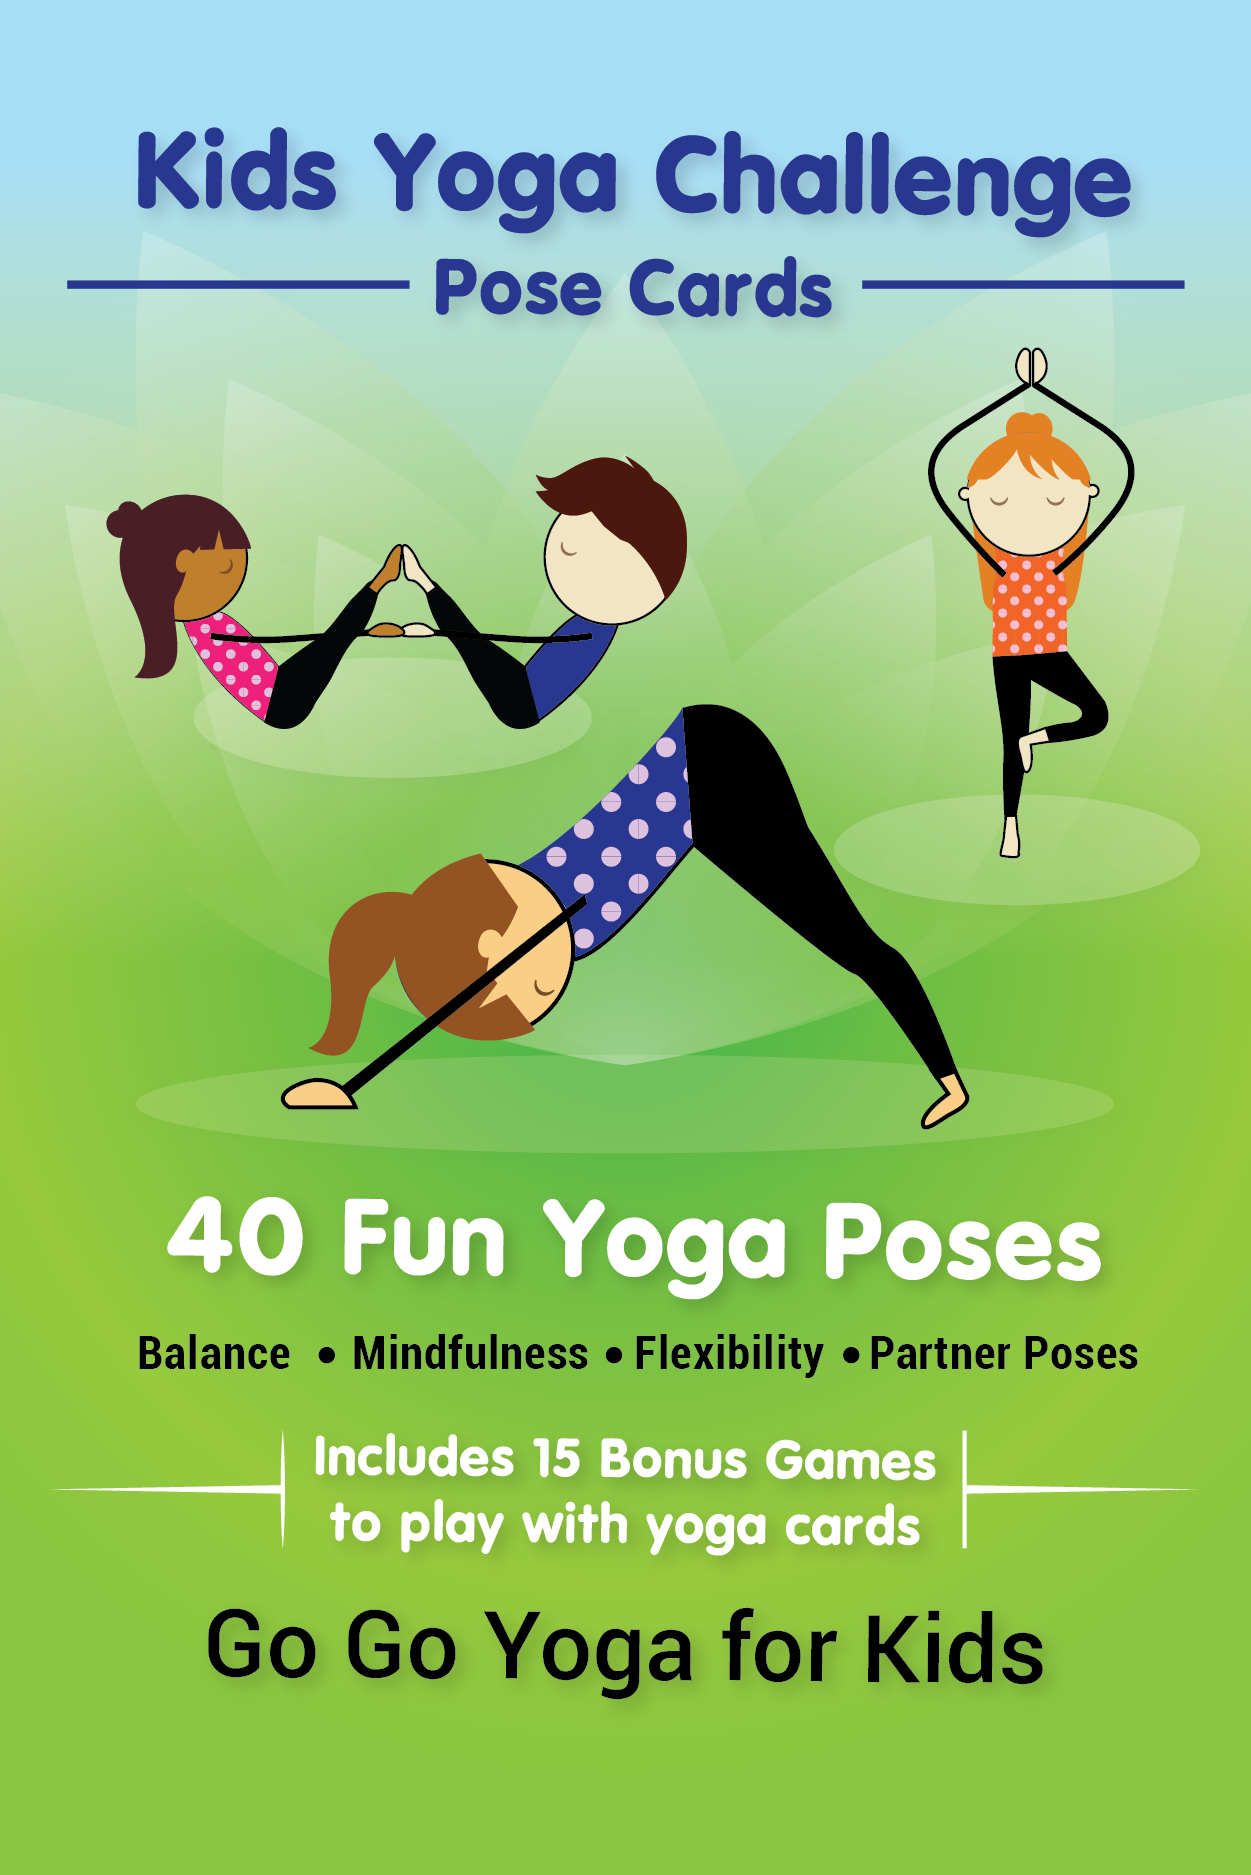 8 Fun Yoga Poses for Toddlers